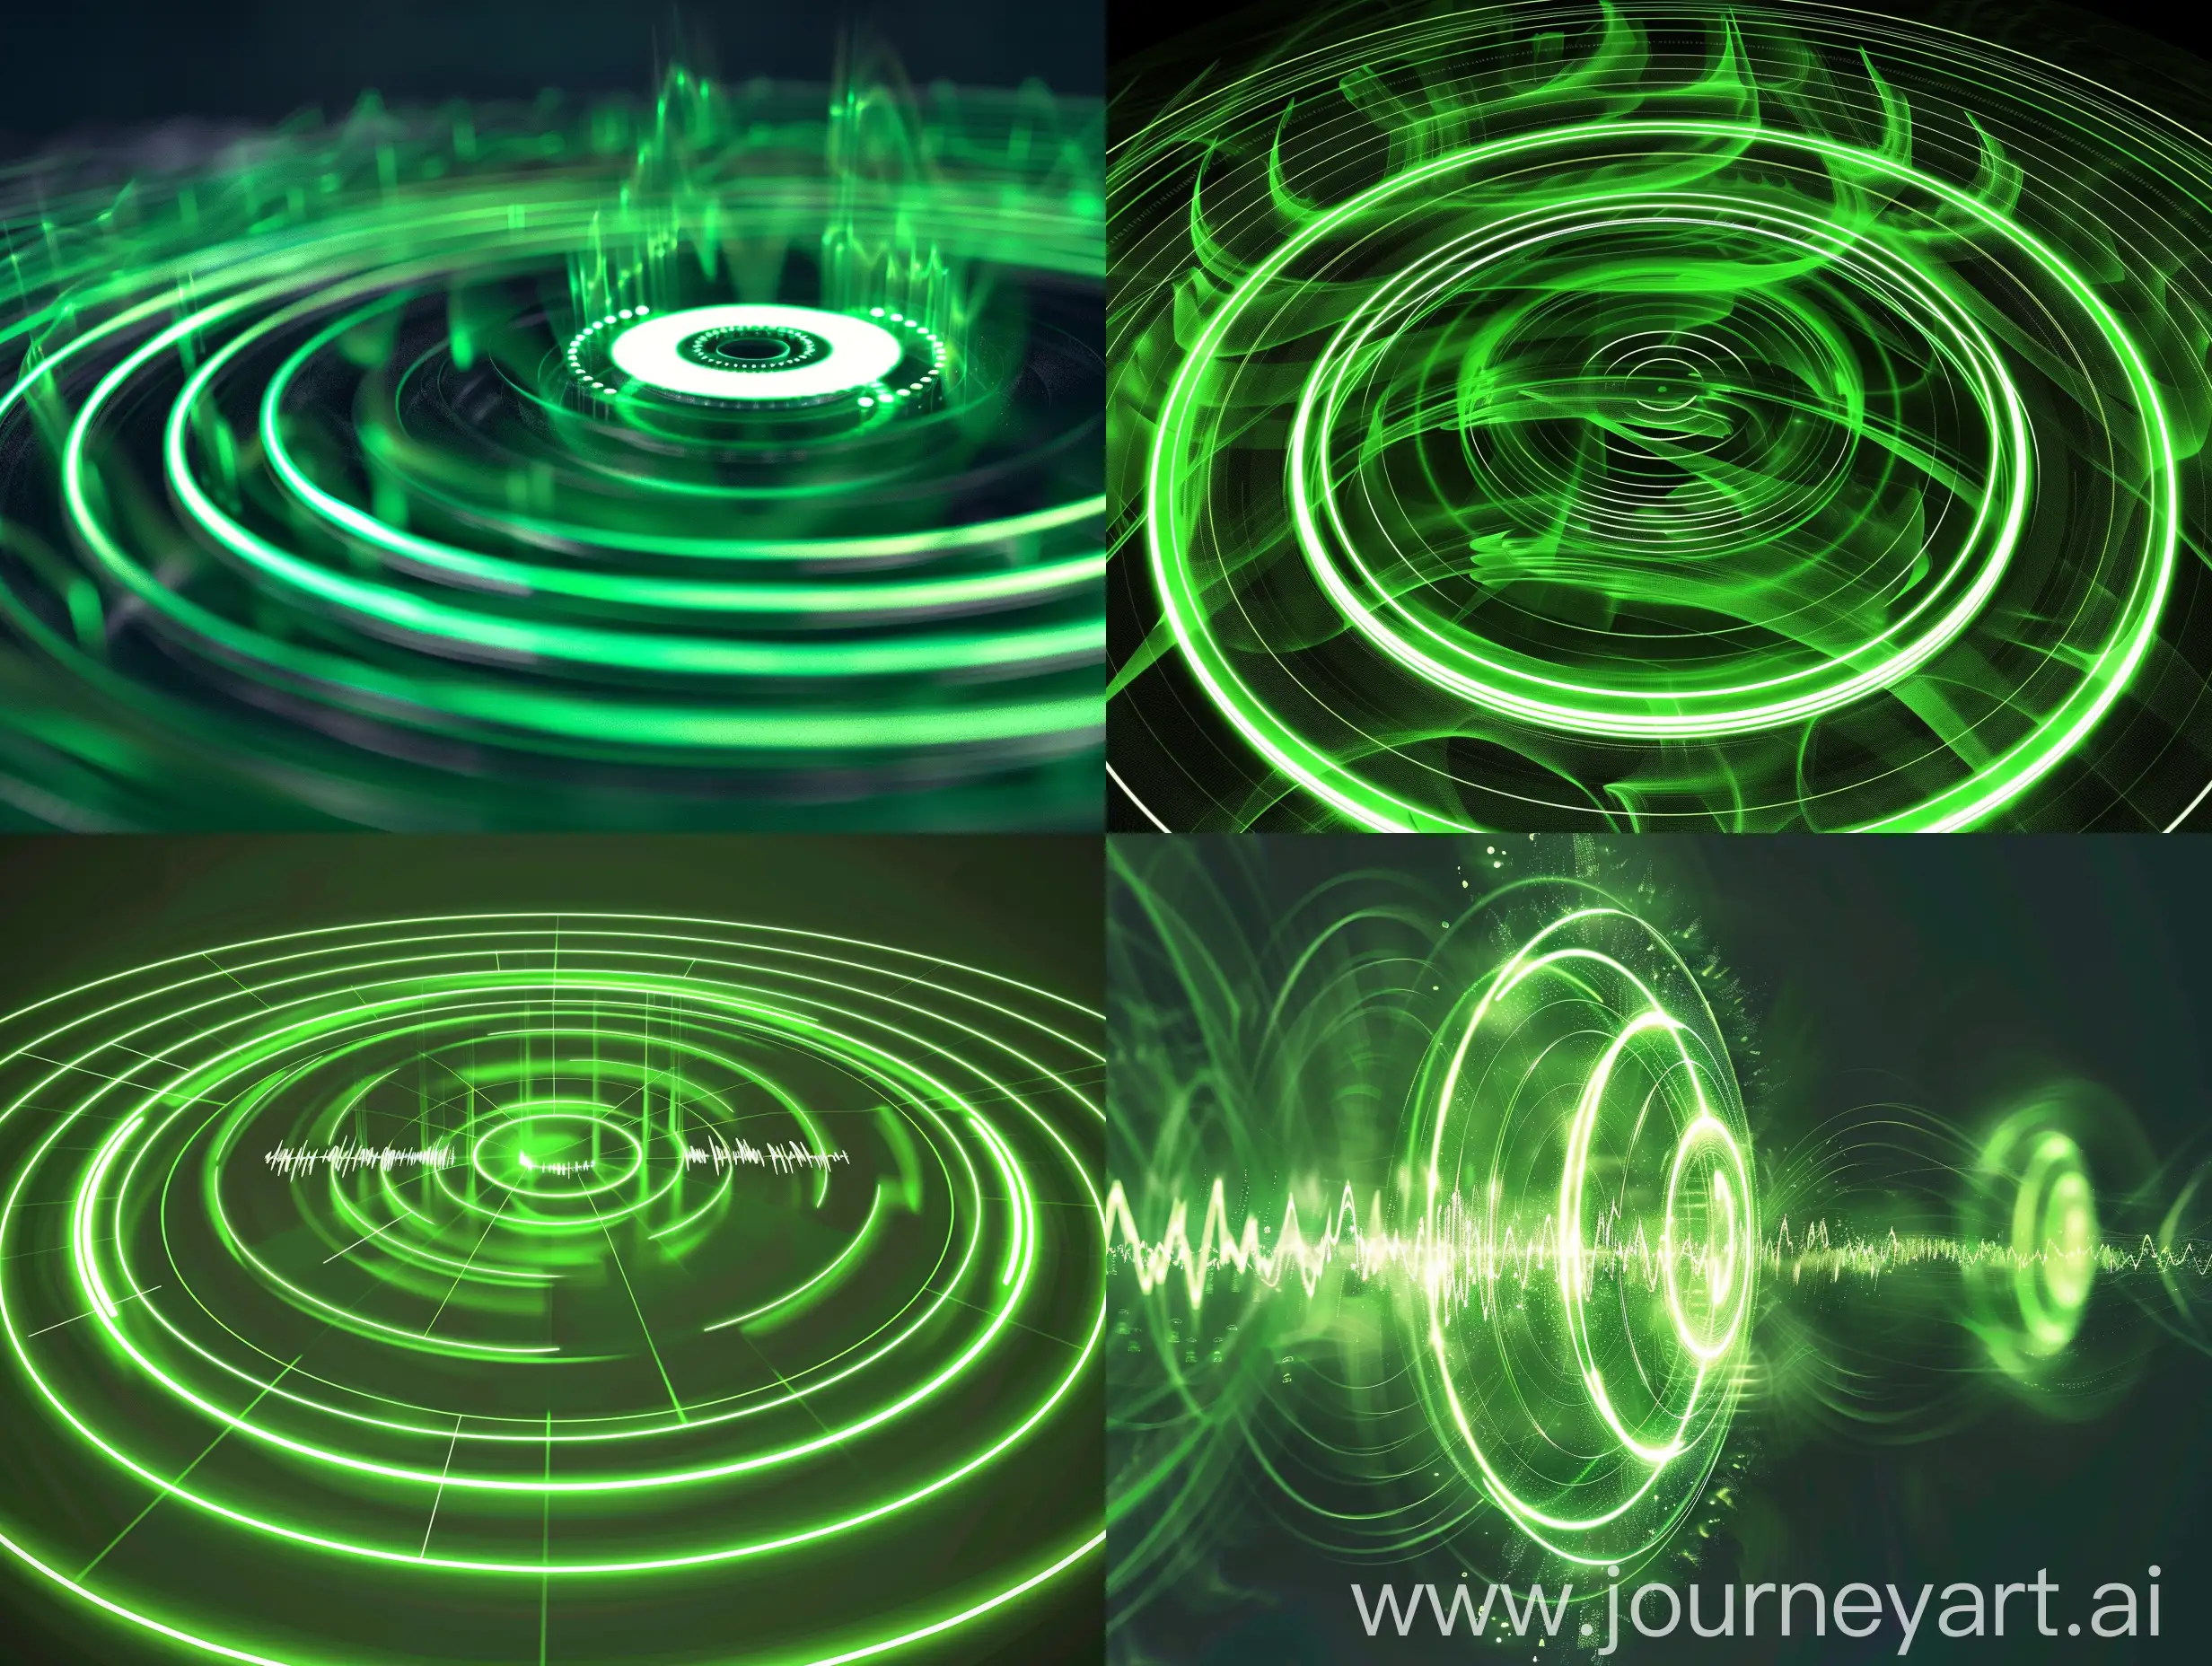 Vibrant-Green-Circular-Sound-Waves-Visualized-in-43-Aspect-Ratio